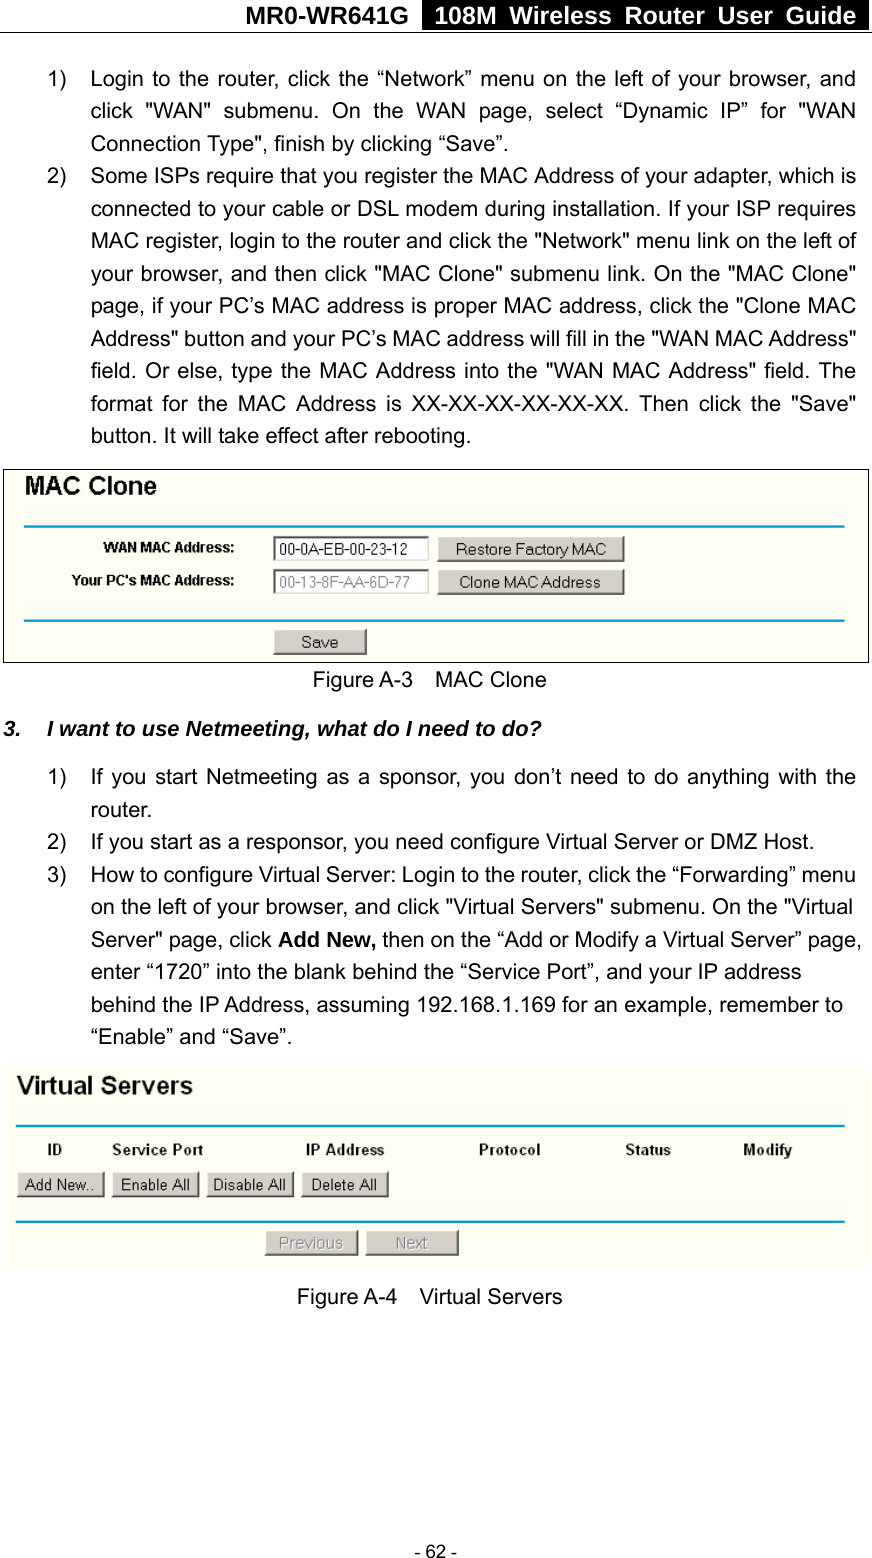 MR0-WR641G   108M Wireless Router User Guide  1)  Login to the router, click the “Network” menu on the left of your browser, and click &quot;WAN&quot; submenu. On the WAN page, select “Dynamic IP” for &quot;WAN Connection Type&quot;, finish by clicking “Save”. 2)  Some ISPs require that you register the MAC Address of your adapter, which is connected to your cable or DSL modem during installation. If your ISP requires MAC register, login to the router and click the &quot;Network&quot; menu link on the left of your browser, and then click &quot;MAC Clone&quot; submenu link. On the &quot;MAC Clone&quot; page, if your PC’s MAC address is proper MAC address, click the &quot;Clone MAC Address&quot; button and your PC’s MAC address will fill in the &quot;WAN MAC Address&quot; field. Or else, type the MAC Address into the &quot;WAN MAC Address&quot; field. The format for the MAC Address is XX-XX-XX-XX-XX-XX. Then click the &quot;Save&quot; button. It will take effect after rebooting.  Figure A-3  MAC Clone 3.  I want to use Netmeeting, what do I need to do? 1)  If you start Netmeeting as a sponsor, you don’t need to do anything with the router. 2)  If you start as a responsor, you need configure Virtual Server or DMZ Host. 3)  How to configure Virtual Server: Login to the router, click the “Forwarding” menu on the left of your browser, and click &quot;Virtual Servers&quot; submenu. On the &quot;Virtual Server&quot; page, click Add New, then on the “Add or Modify a Virtual Server” page,   enter “1720” into the blank behind the “Service Port”, and your IP address behind the IP Address, assuming 192.168.1.169 for an example, remember to “Enable” and “Save”.  Figure A-4  Virtual Servers  - 62 - 